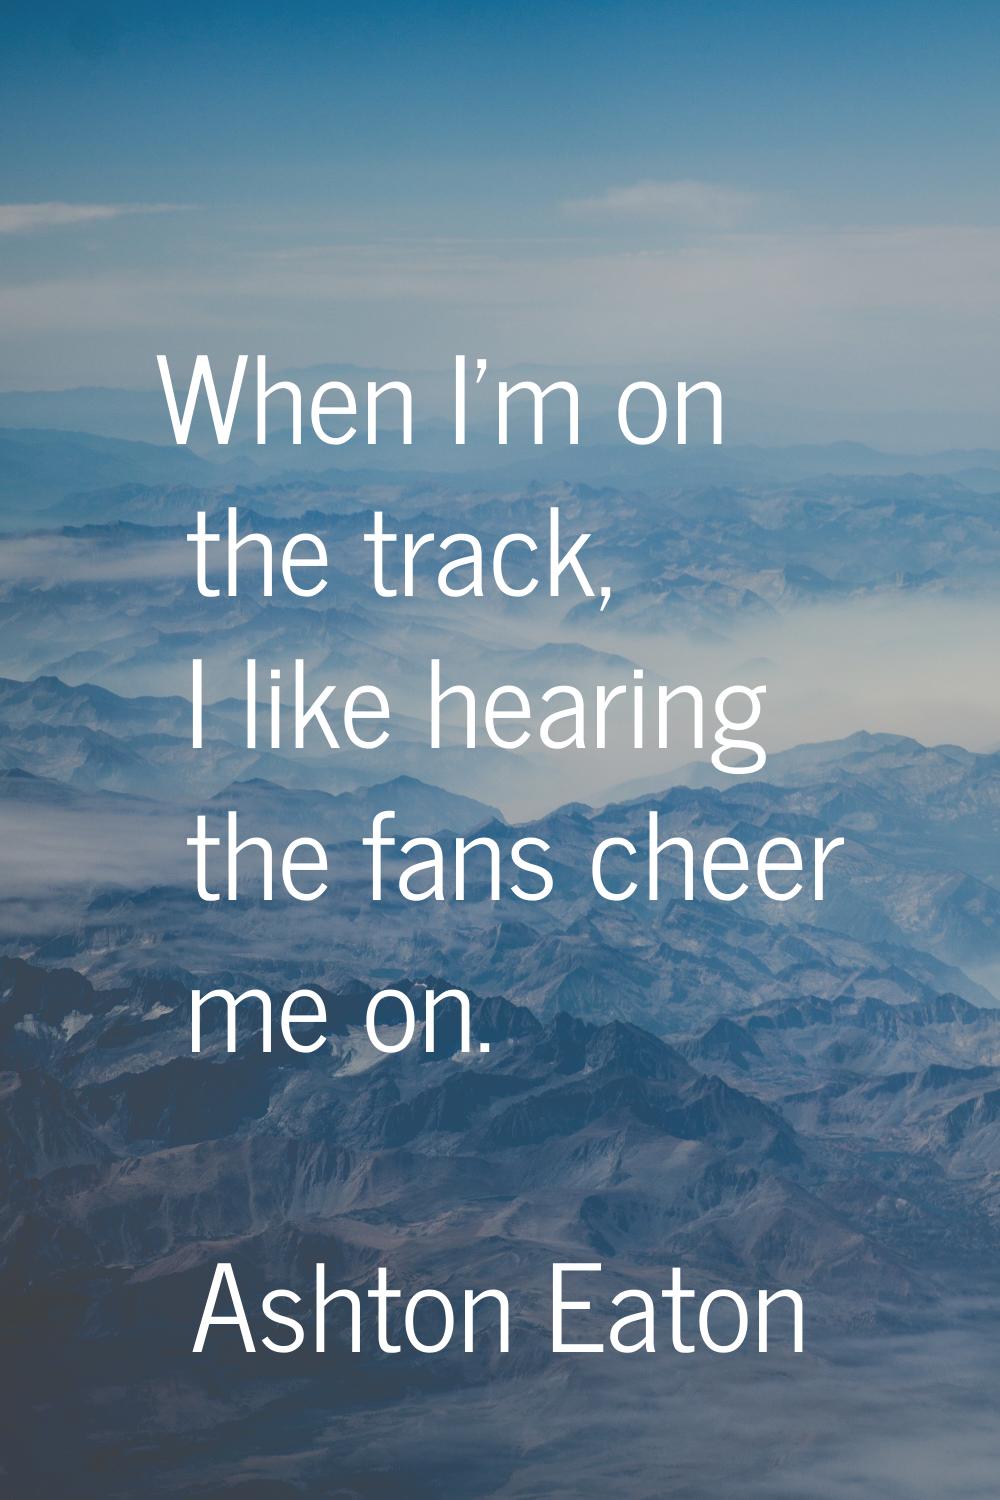 When I'm on the track, I like hearing the fans cheer me on.